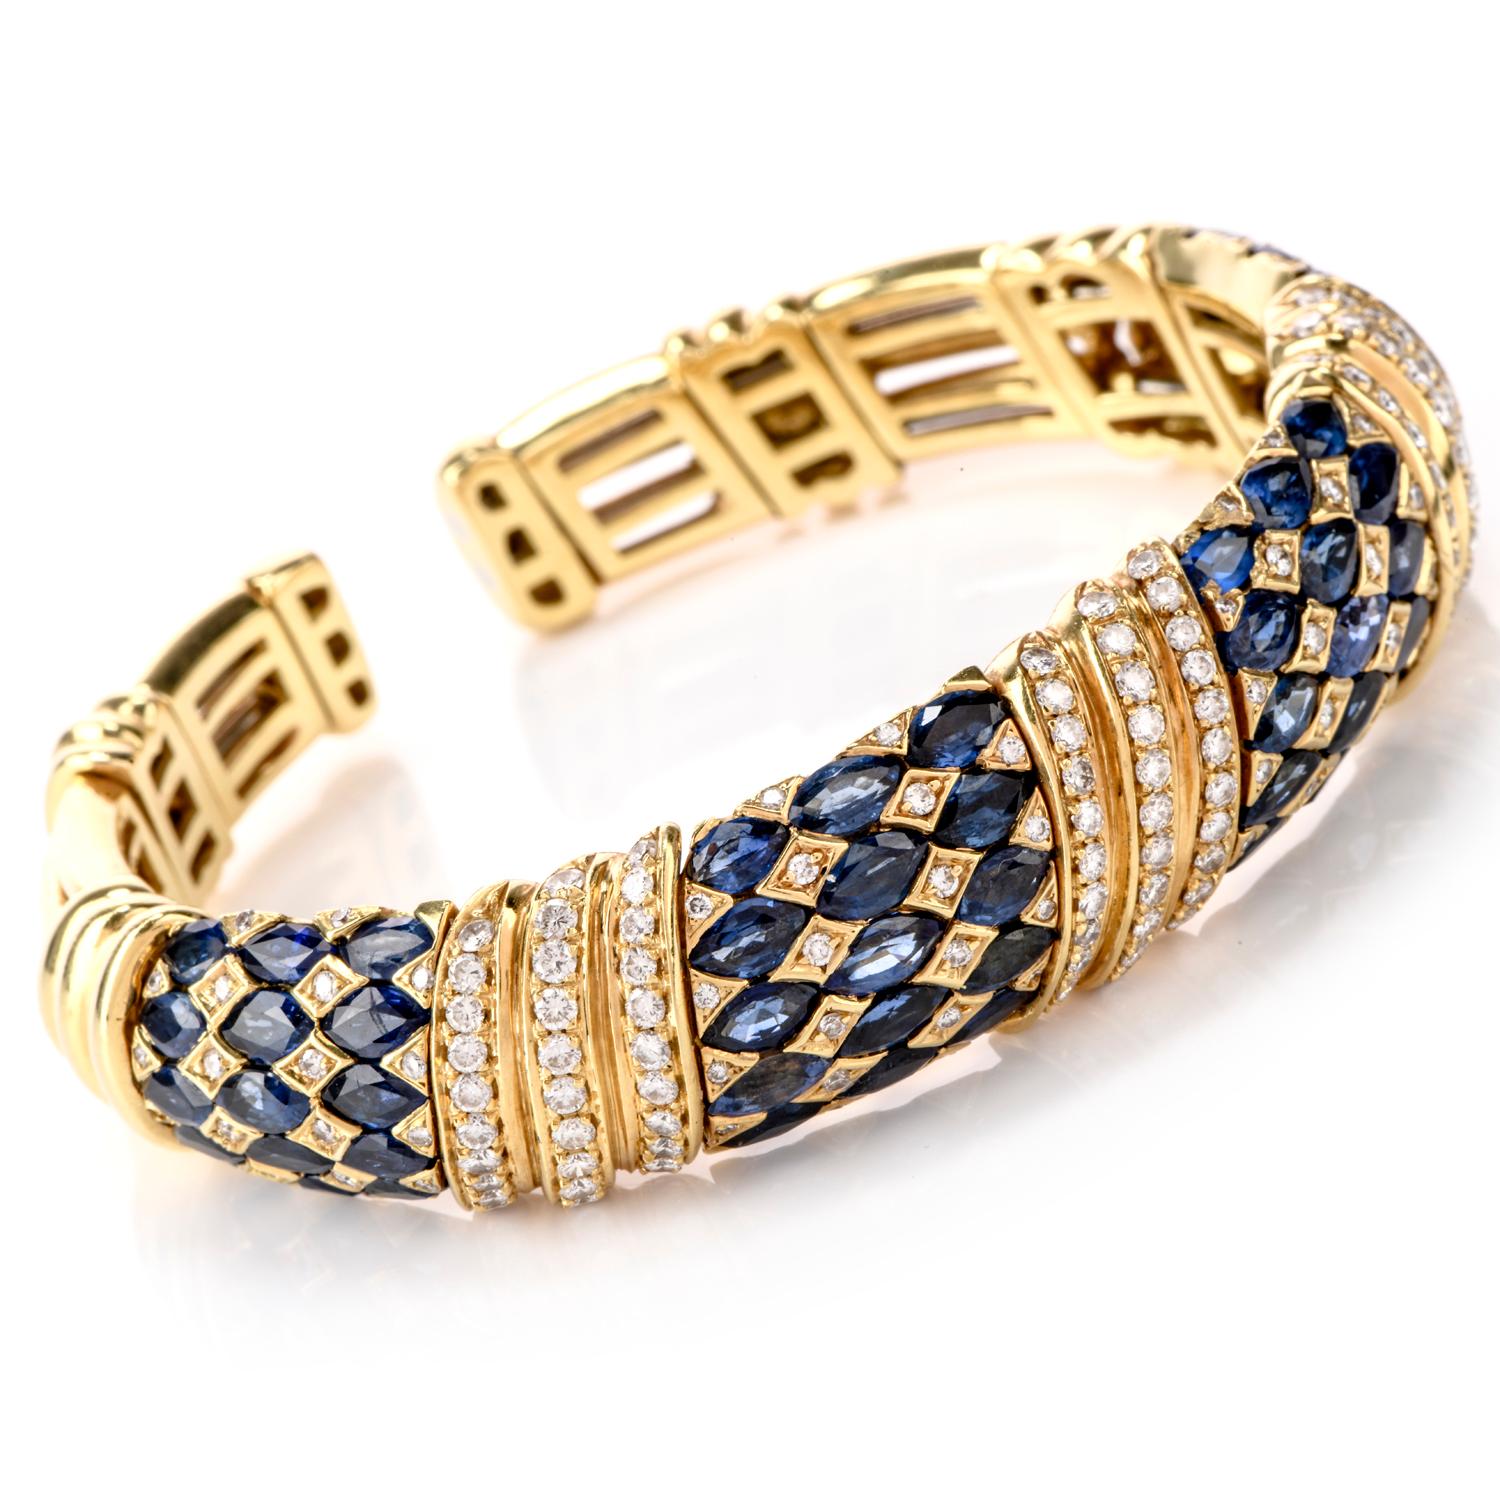 This Regal Diamond and Sapphire bracelet is sure to make

a Statement in any room. Wide throughout and flexible to access, this bracelet has 4 defined links with Jester patterns of  Sapphire and Diamond

and 3 separating links of diagonal prong set